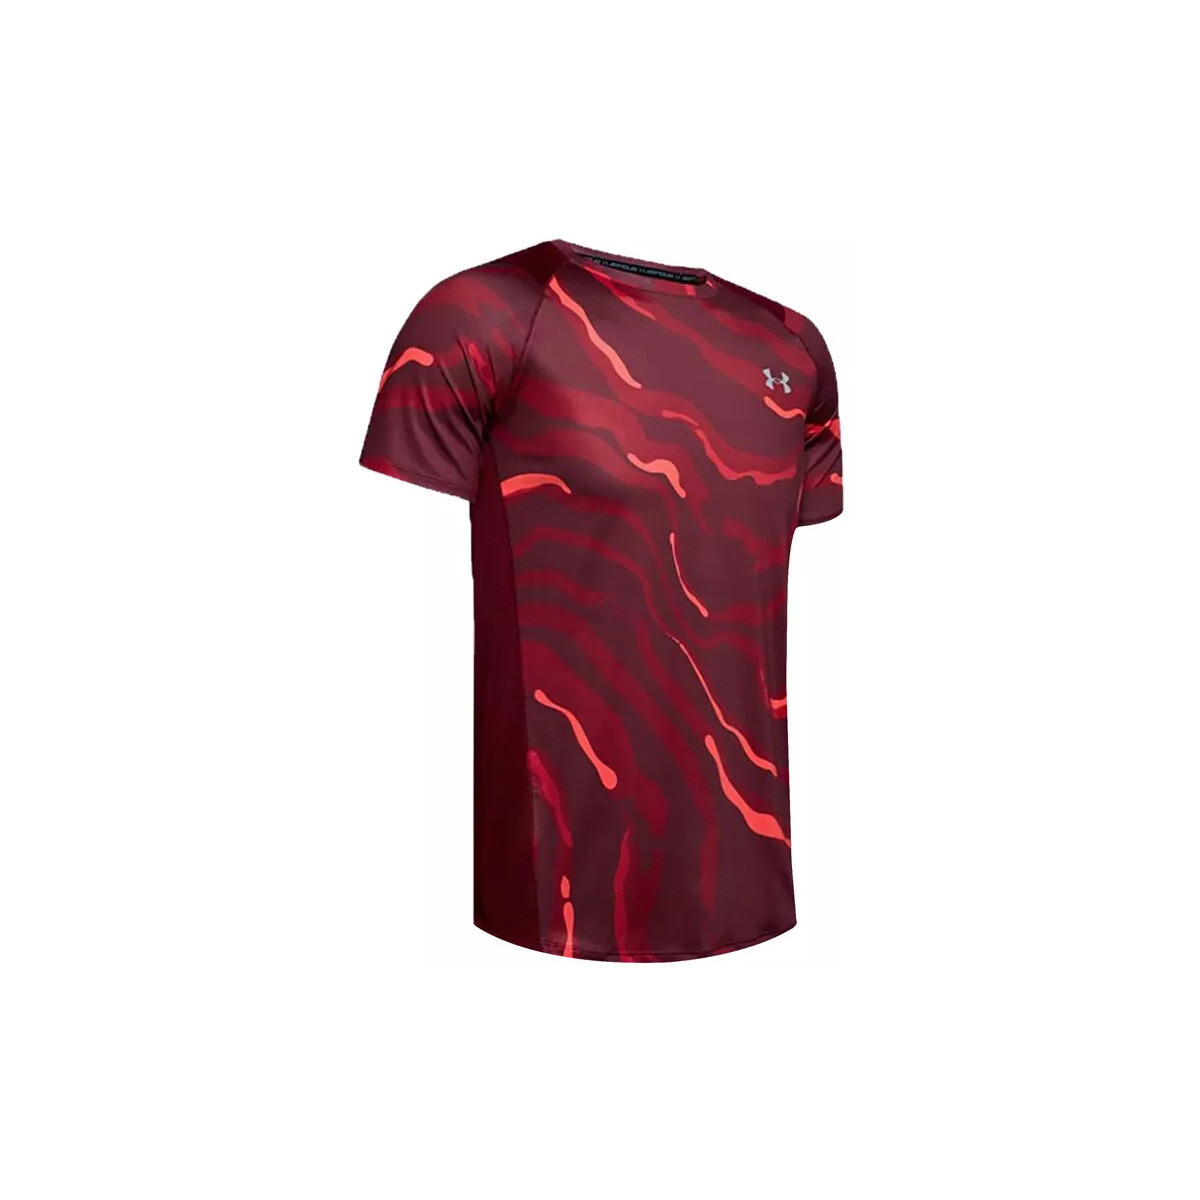 Vêtements Homme T-shirts & Polos Under Armour MK-1 PRINTED Rouge